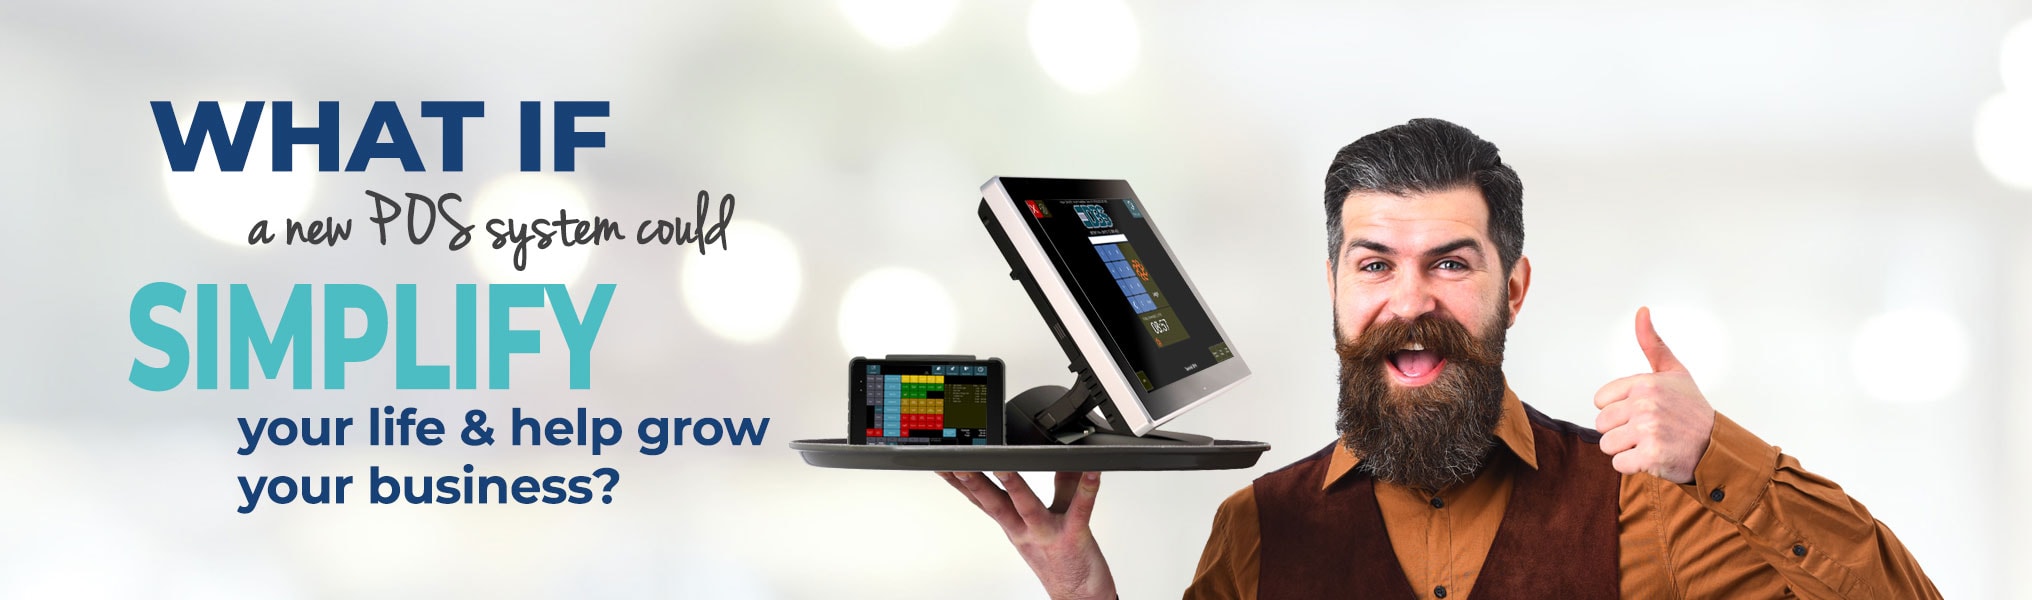 What if a new POS system could simplify your life & help grow your business with guy pointing up